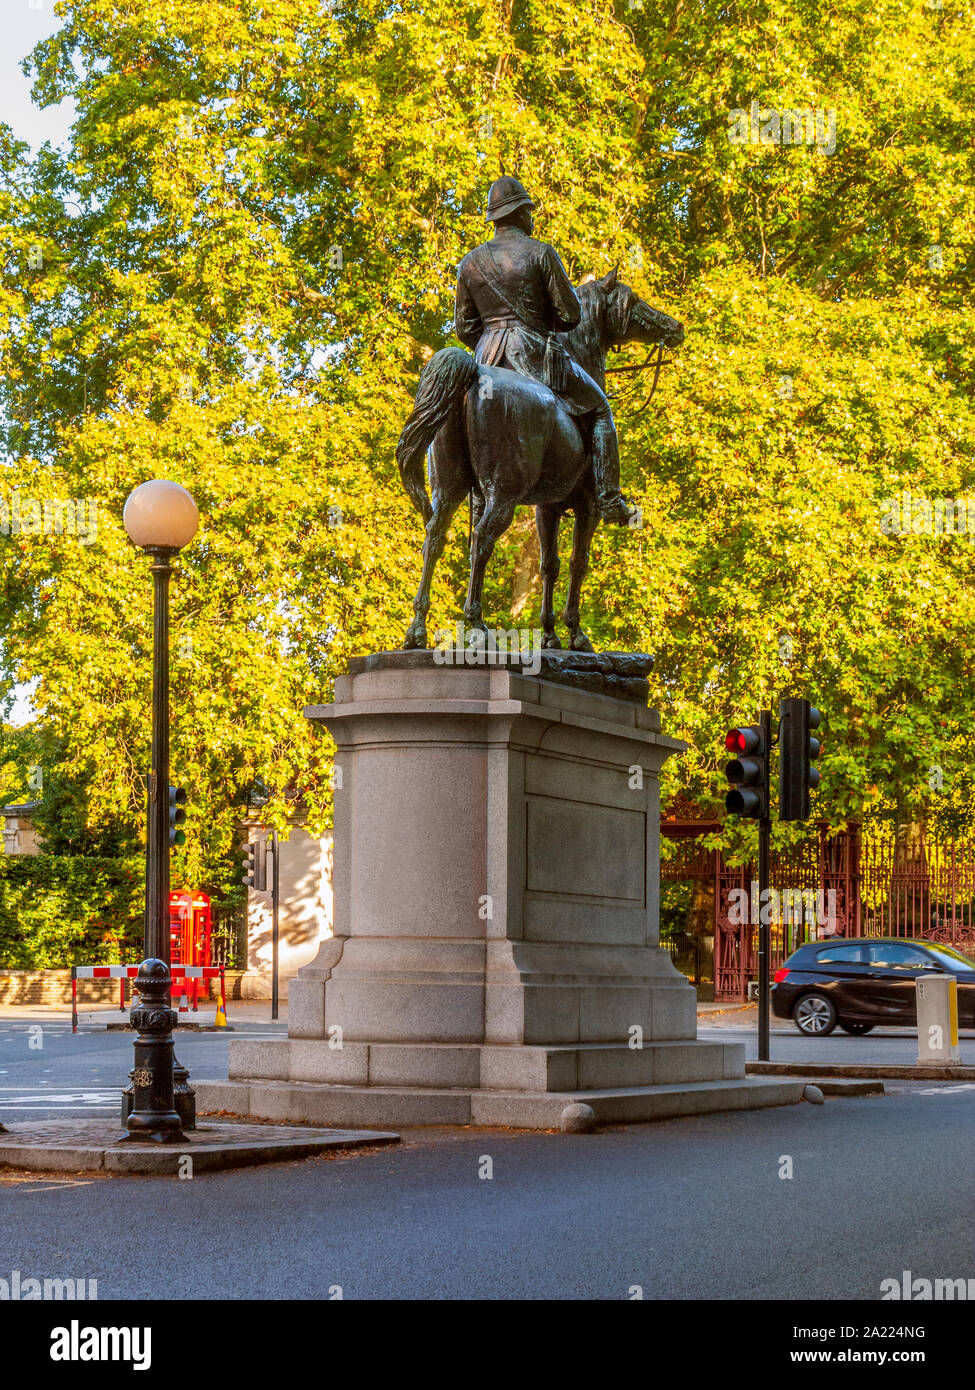 Equestrian Statue of Robert Napier, Lord Napier of Magdala, by Joseph Boehm, Queen's Gate, London Stock Photo